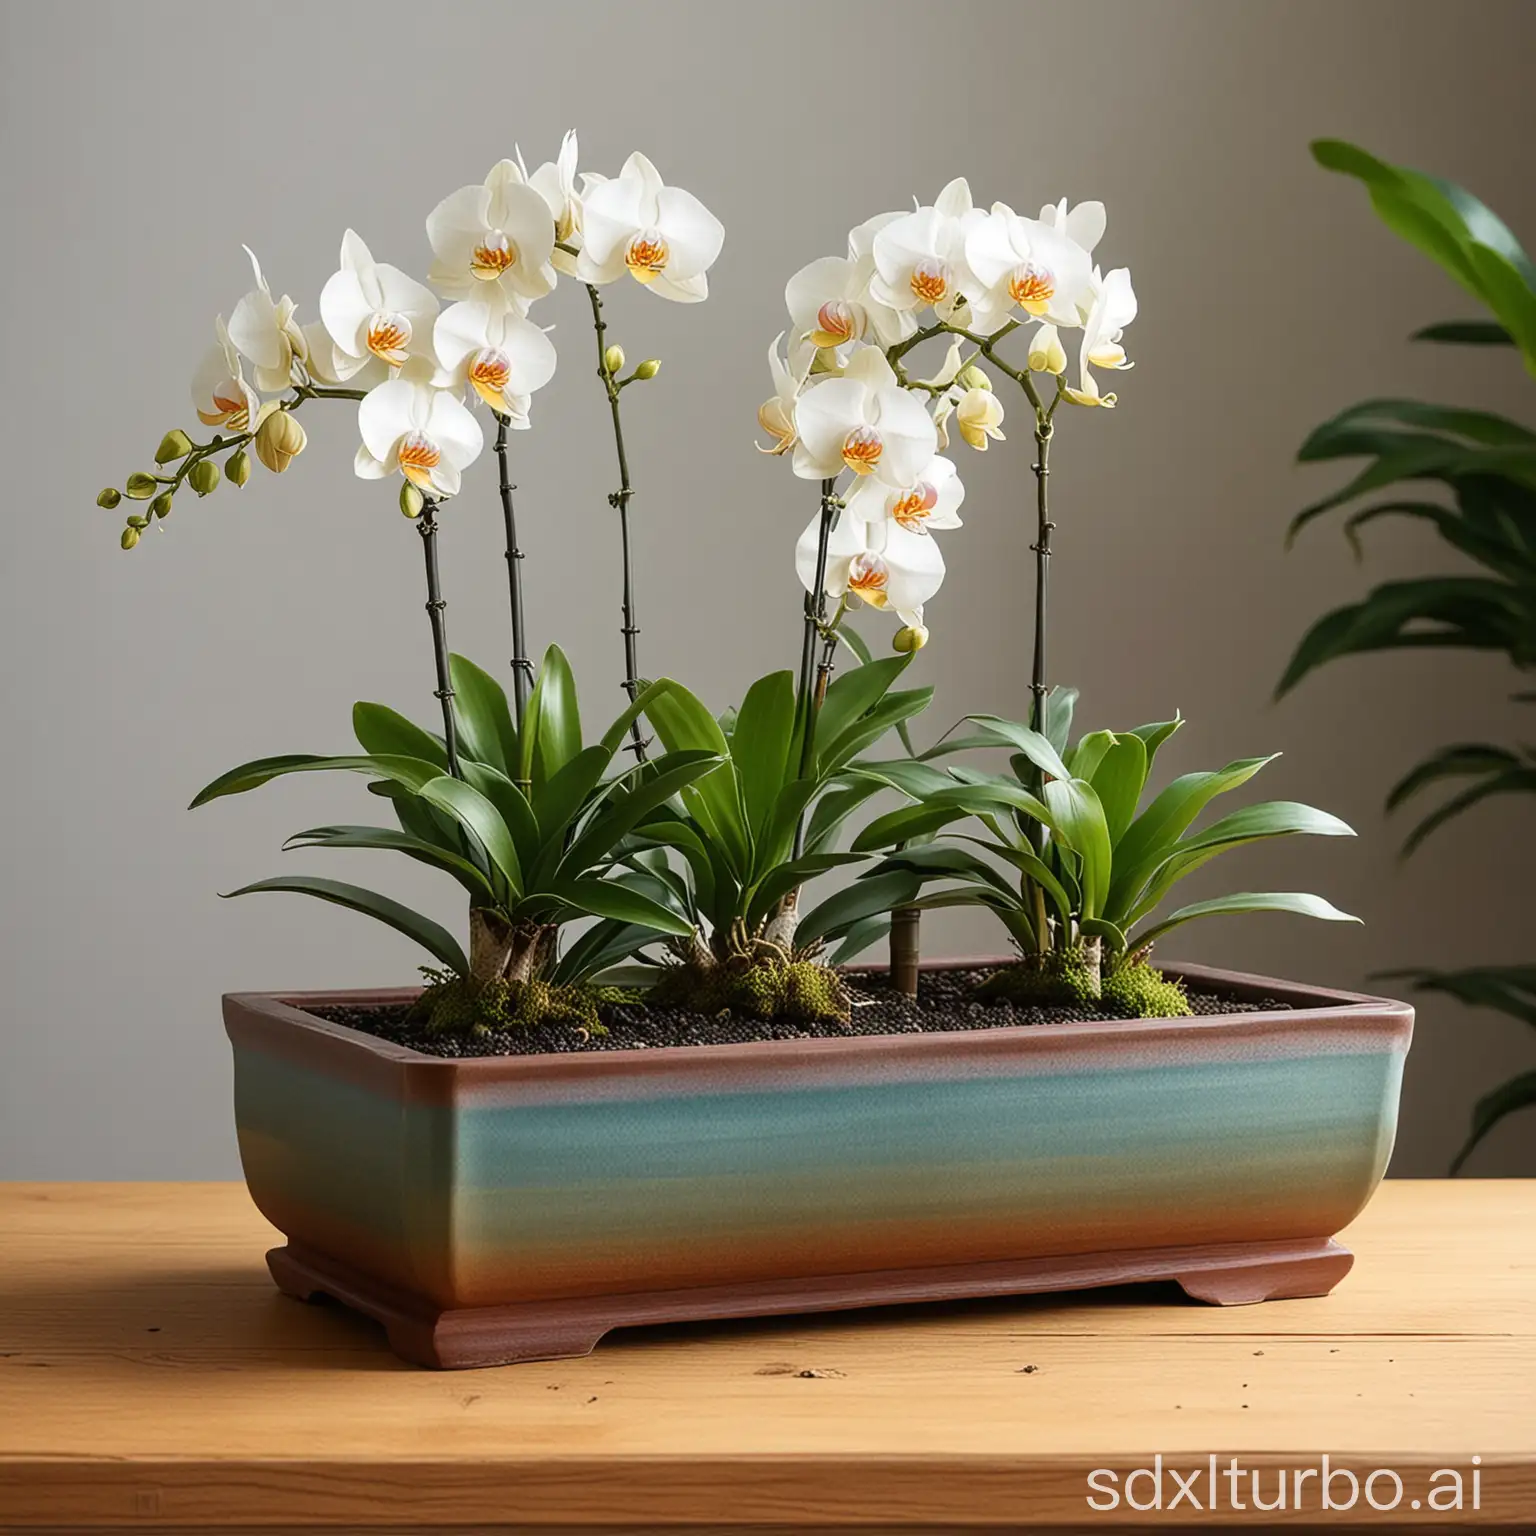 Draw a product detail page with a rectangular bonsai pot with orchids, the bonsai pot is placed in a bright part of the room, preferably in a place where it can receive proper sunlight, but avoid prolonged exposure to strong sunlight to avoid damage to the bonsai. It's usually a good idea to choose a location close to a window to ensure that the plants can get the right amount of light.